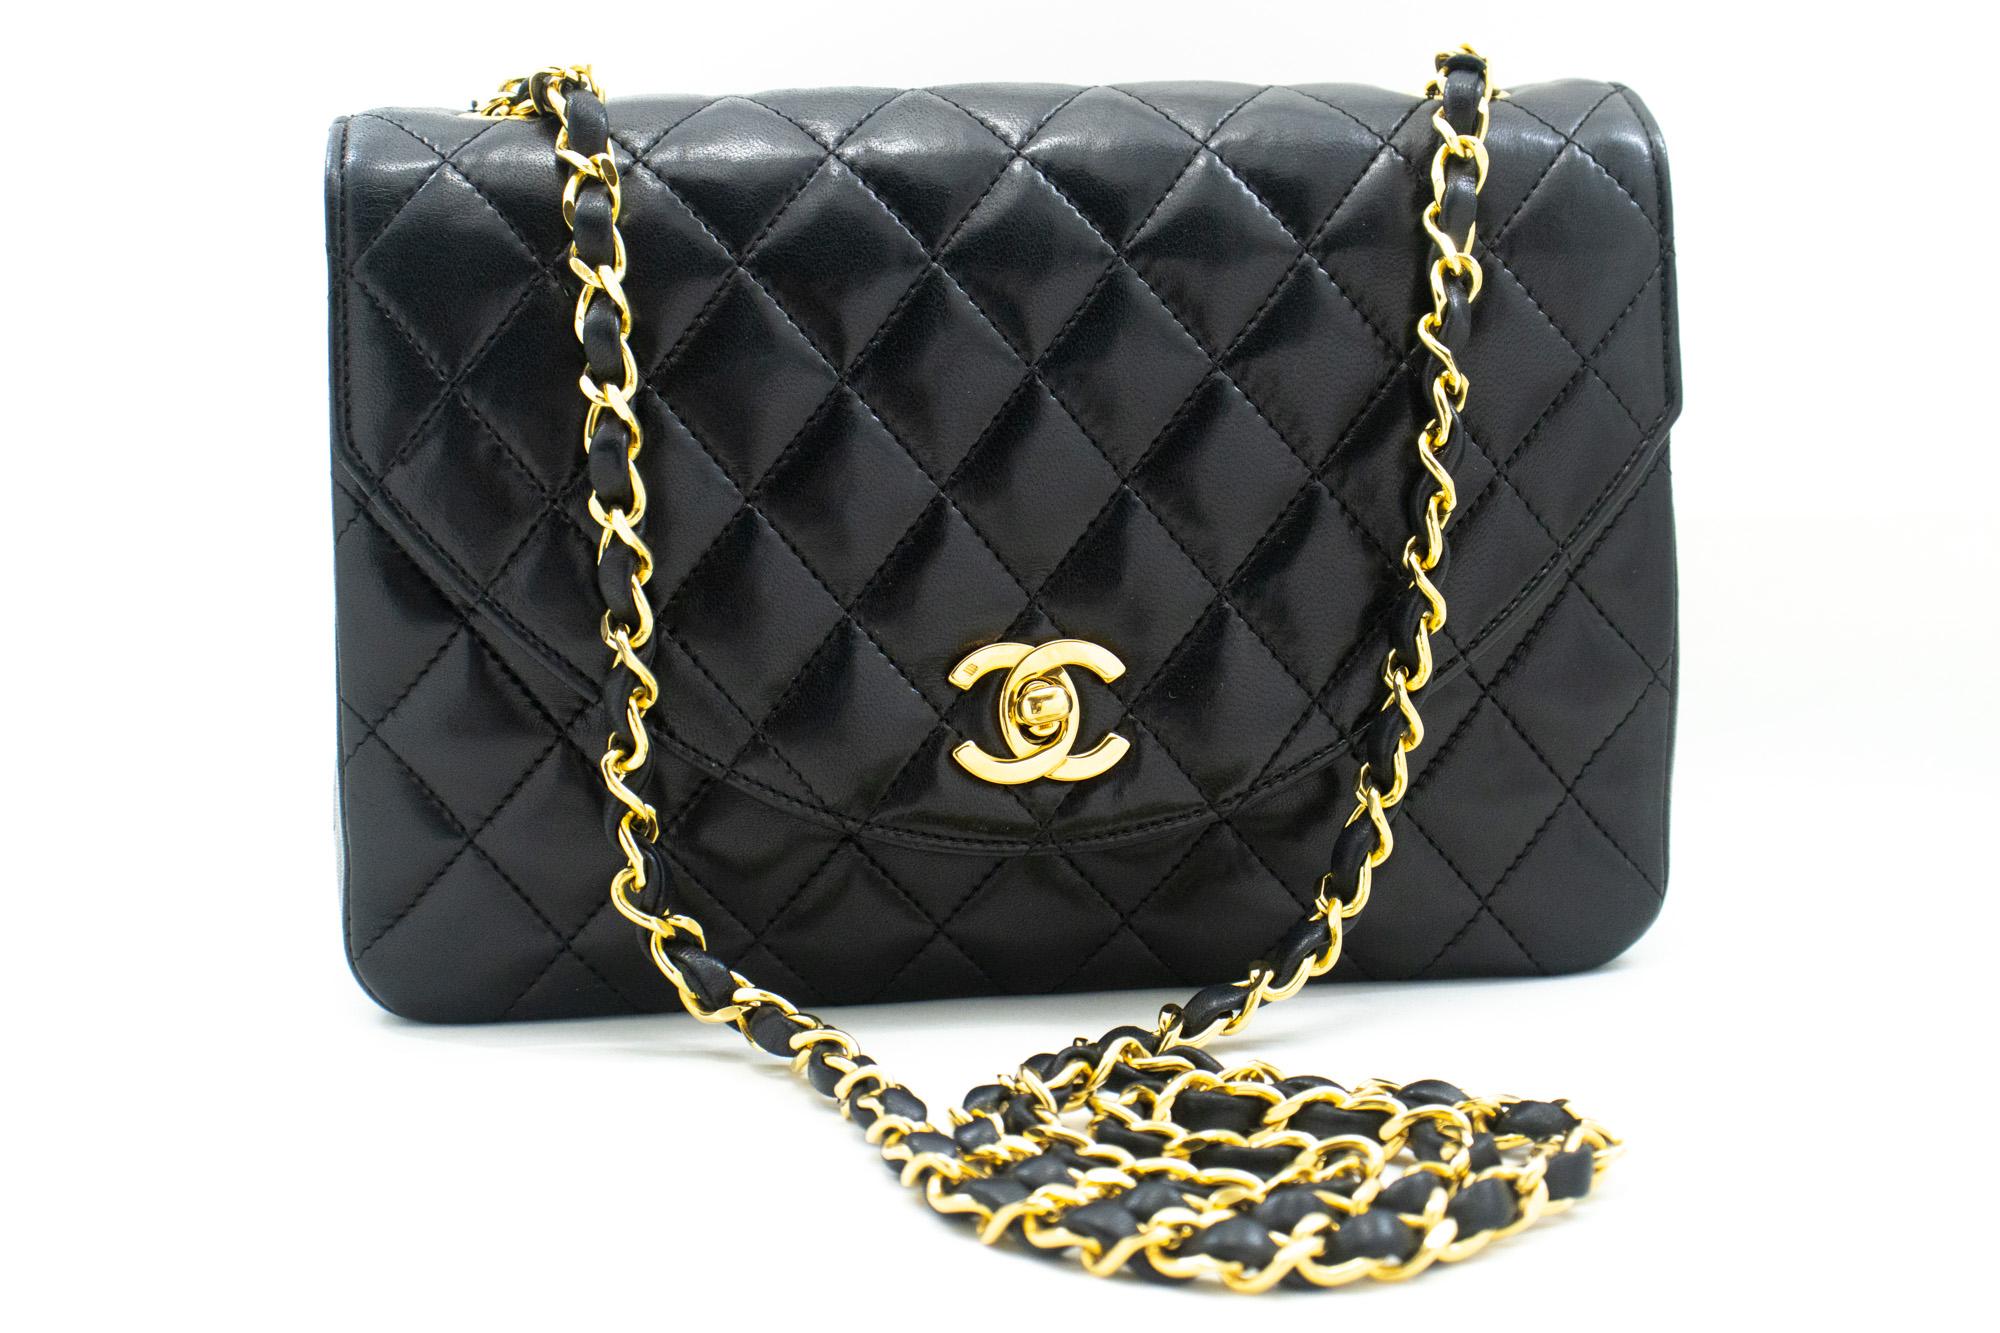 An authentic CHANEL Half Moon Chain Shoulder Bag Crossbody Black Quilted Flap. The color is Black. The outside material is Leather. The pattern is Solid. This item is Vintage / Classic. The year of manufacture would be 1996-1997.
Conditions &